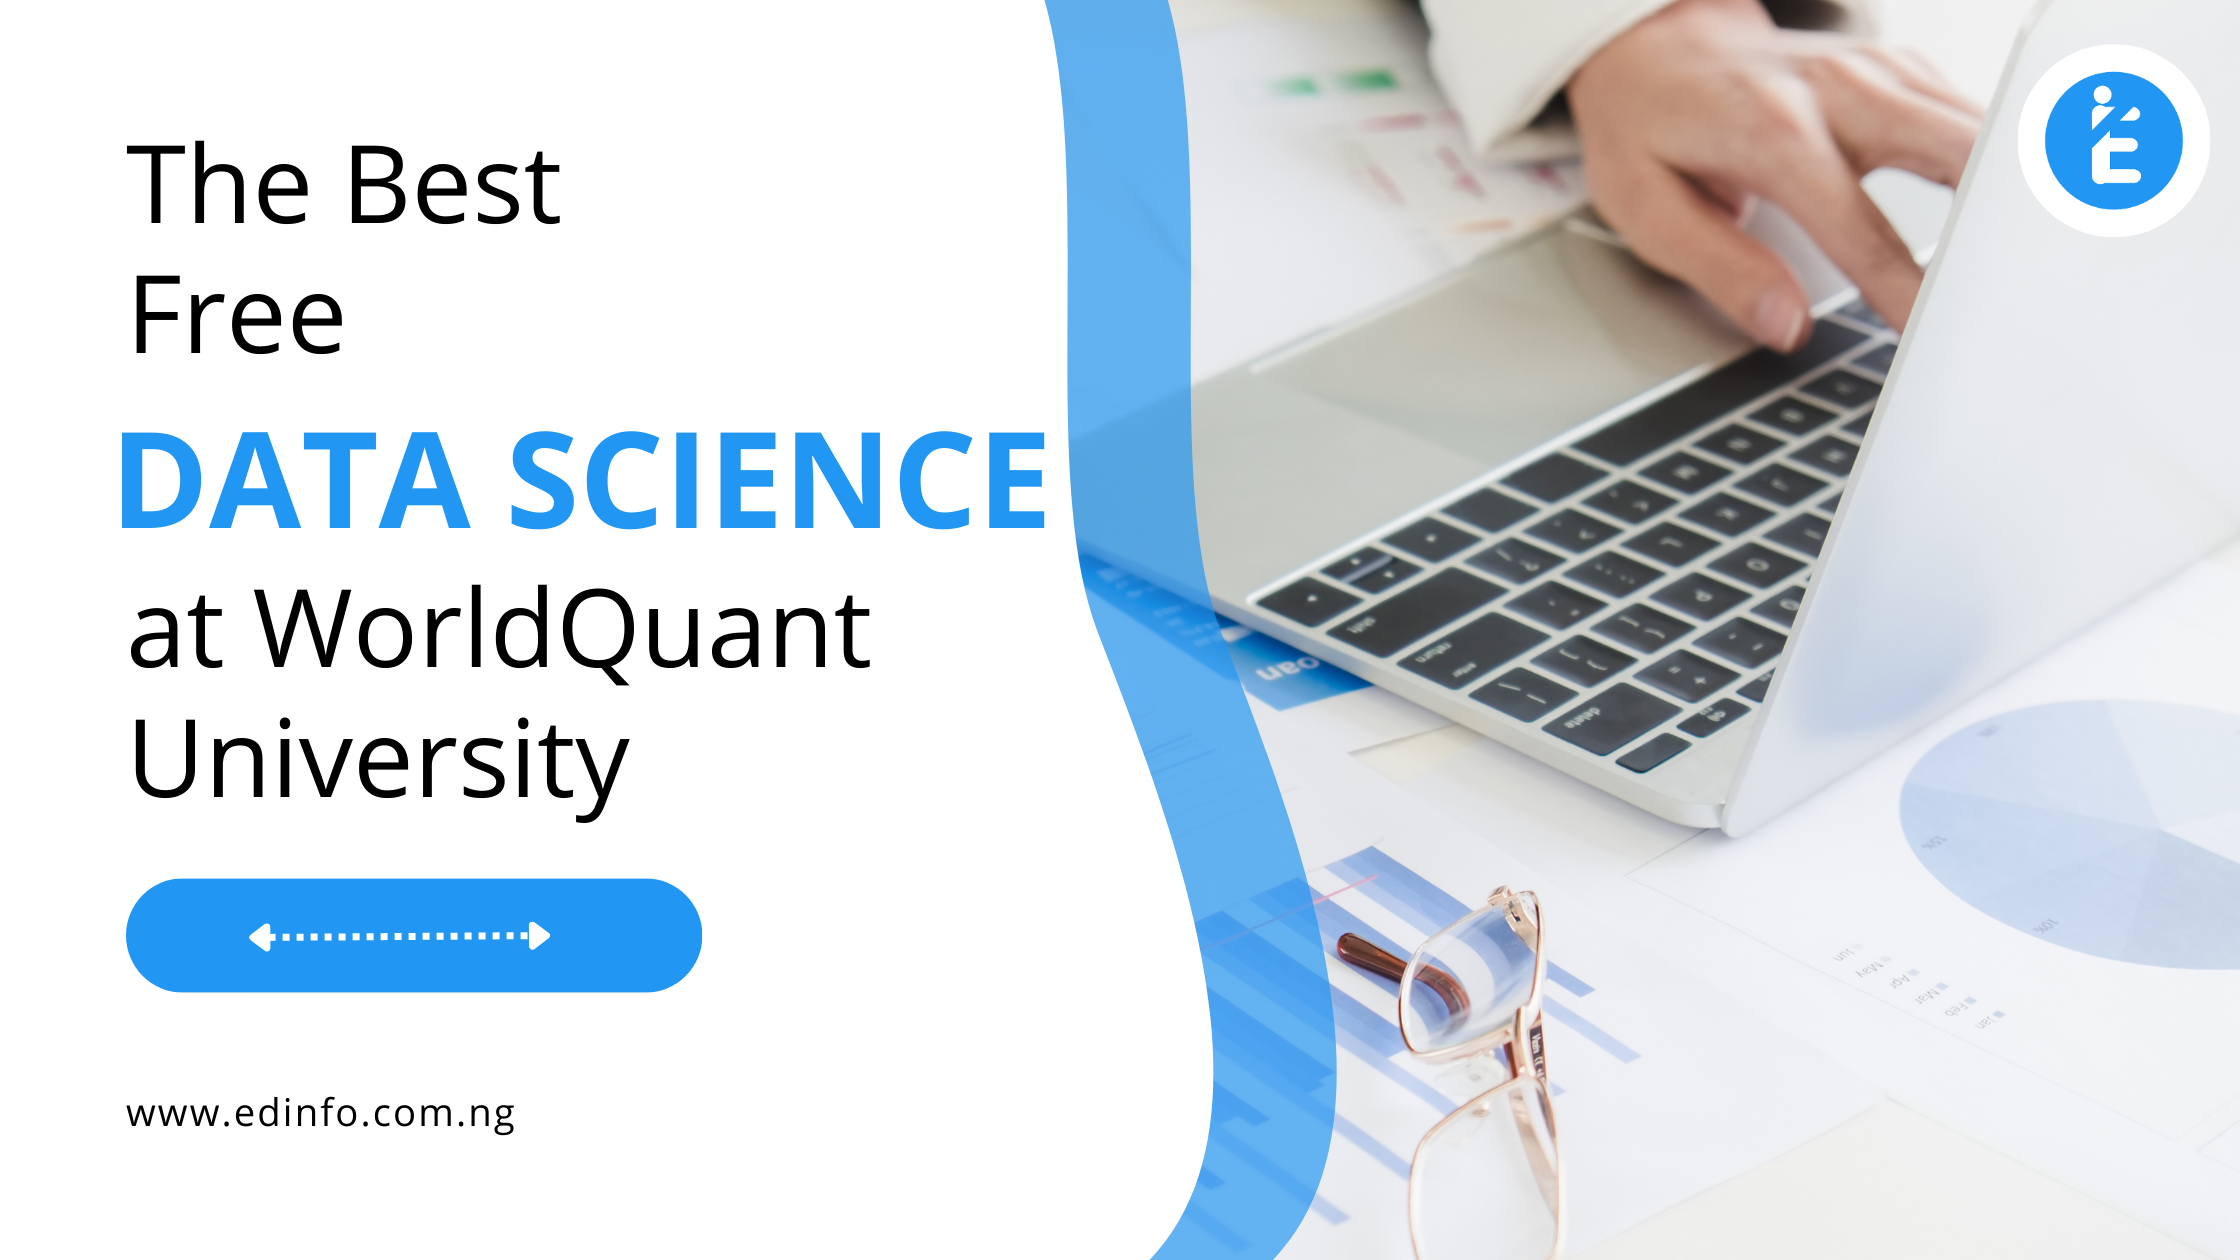 The Best Free Data Science Course at Worldquant University